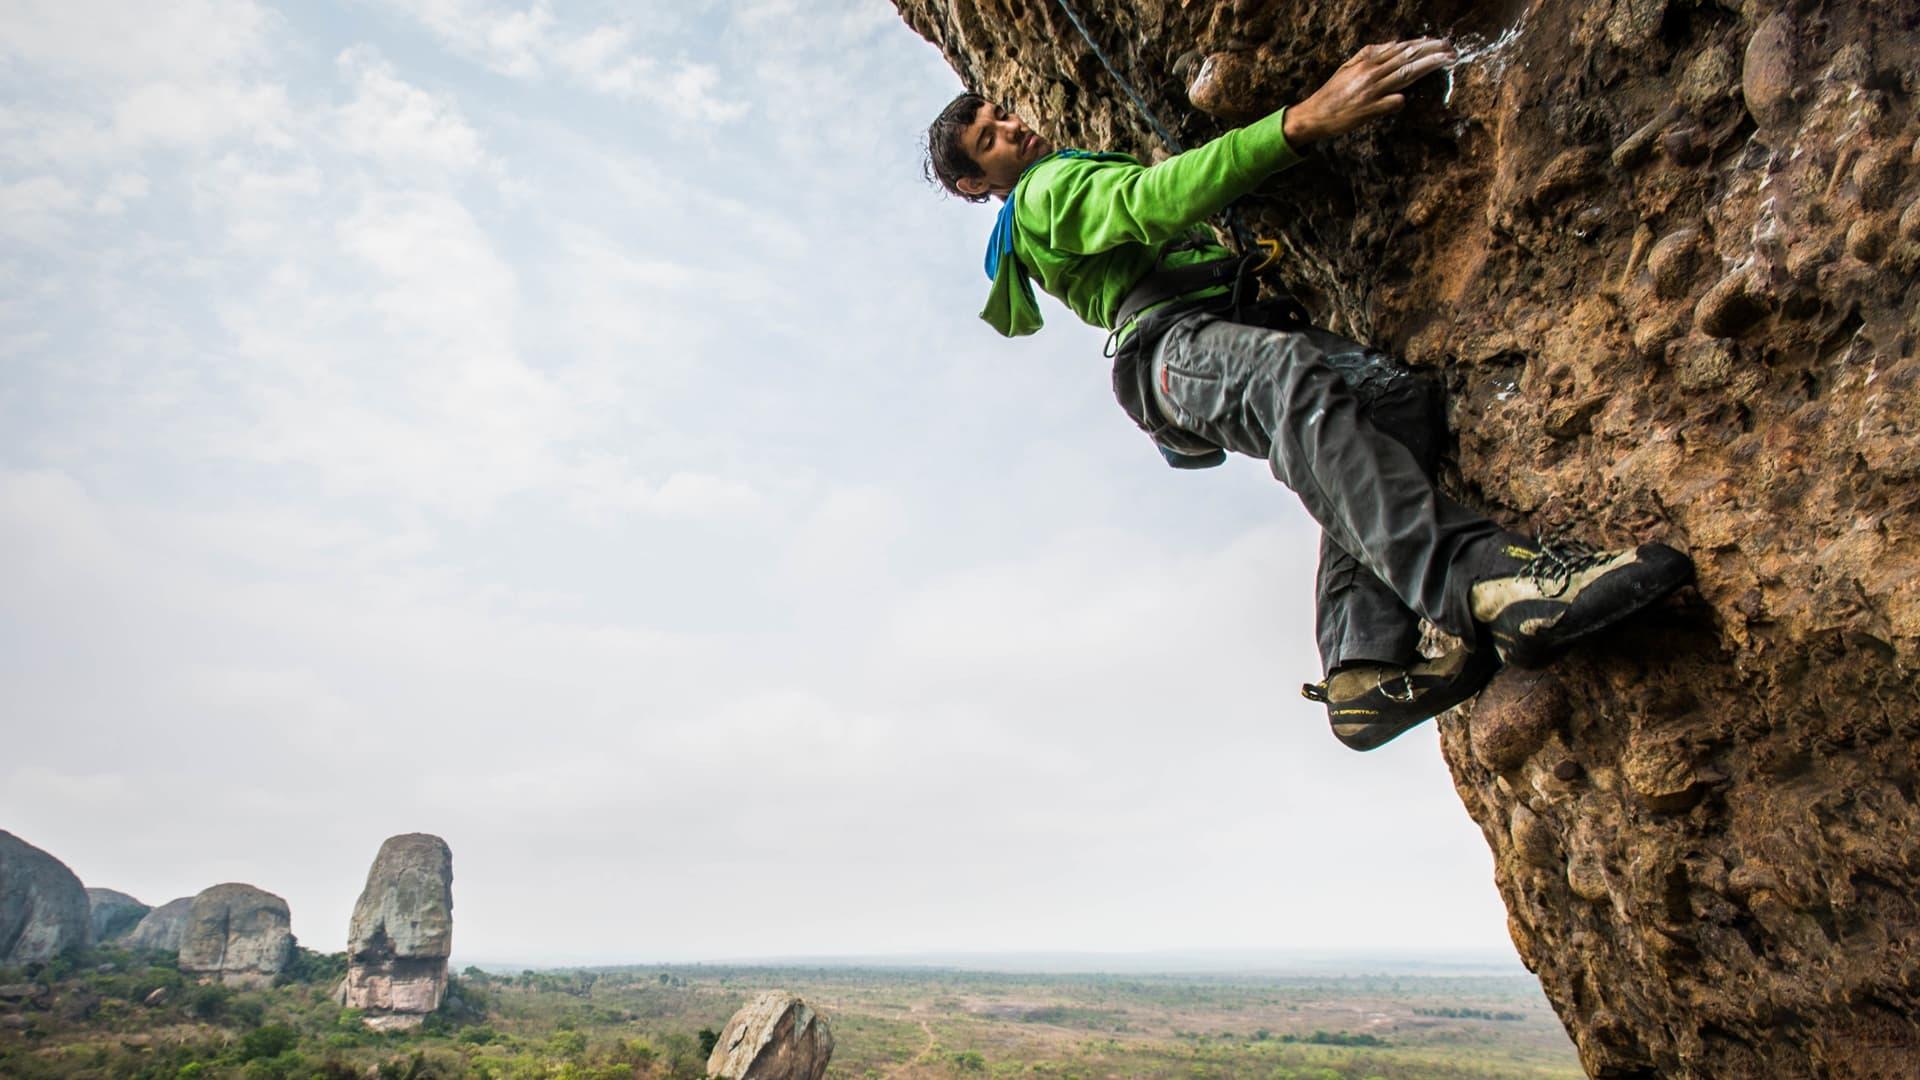 Crack Climbs and Land Mines, Alex Honnold in Angola backdrop